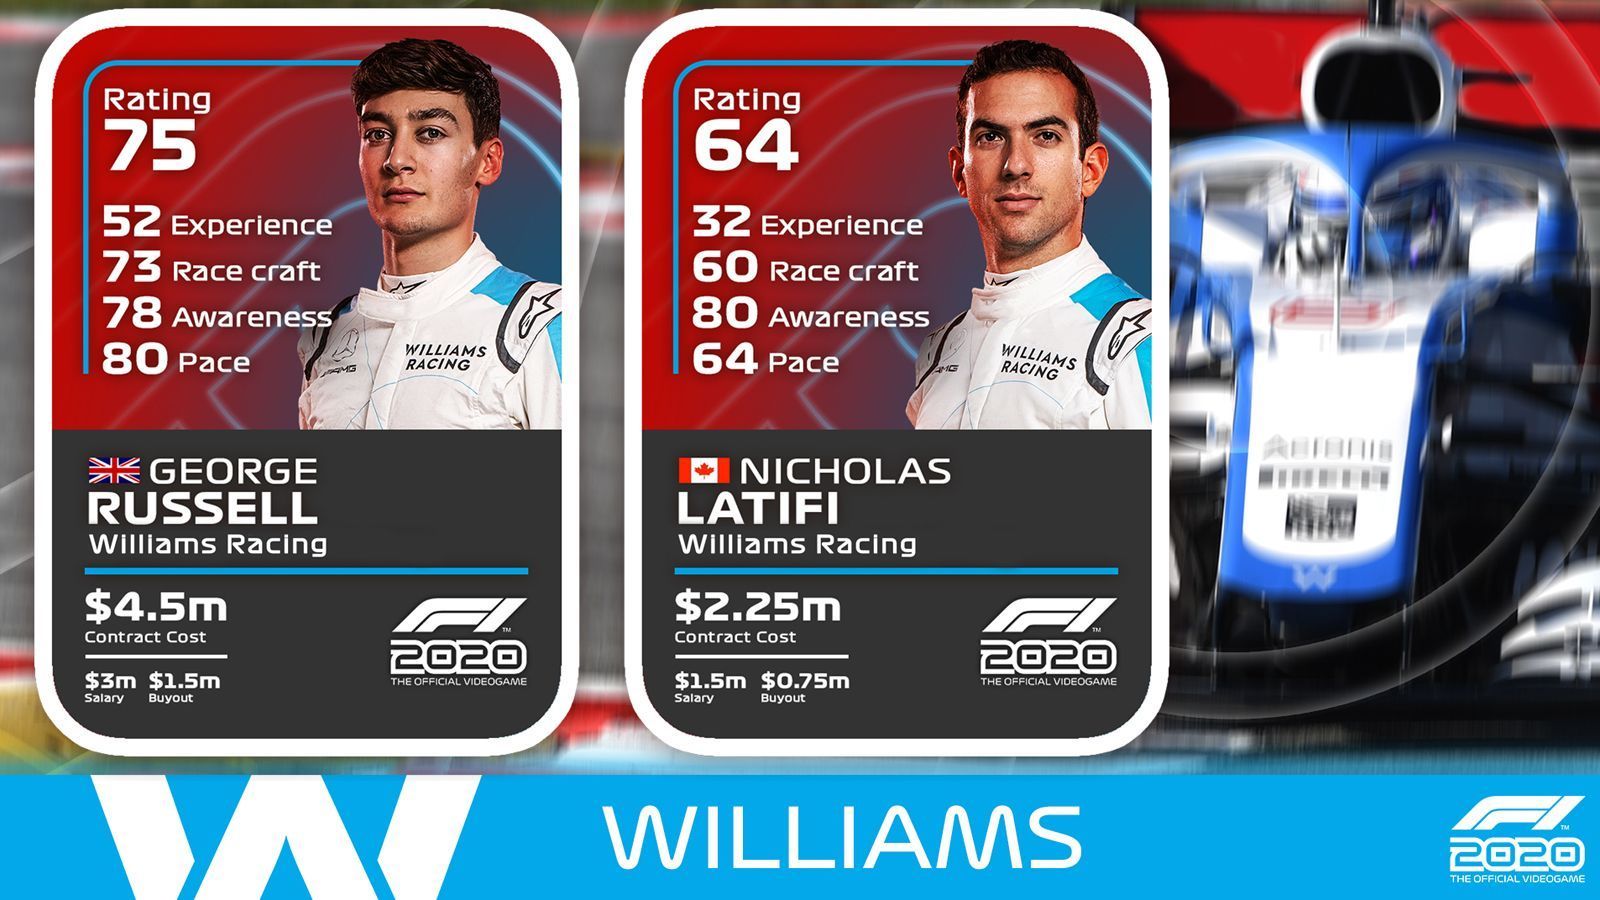 
                <strong>Williams</strong><br>
                George Russell: Erfahrung 52, Fahrkunst 73, Bewusstsein 78, Pace 80, Overall Rating 75Nicholas Latifi: Erfahrung 32, Fahrkunst 60, Bewusstsein 80, Pace 64, Overall Rating 64
              